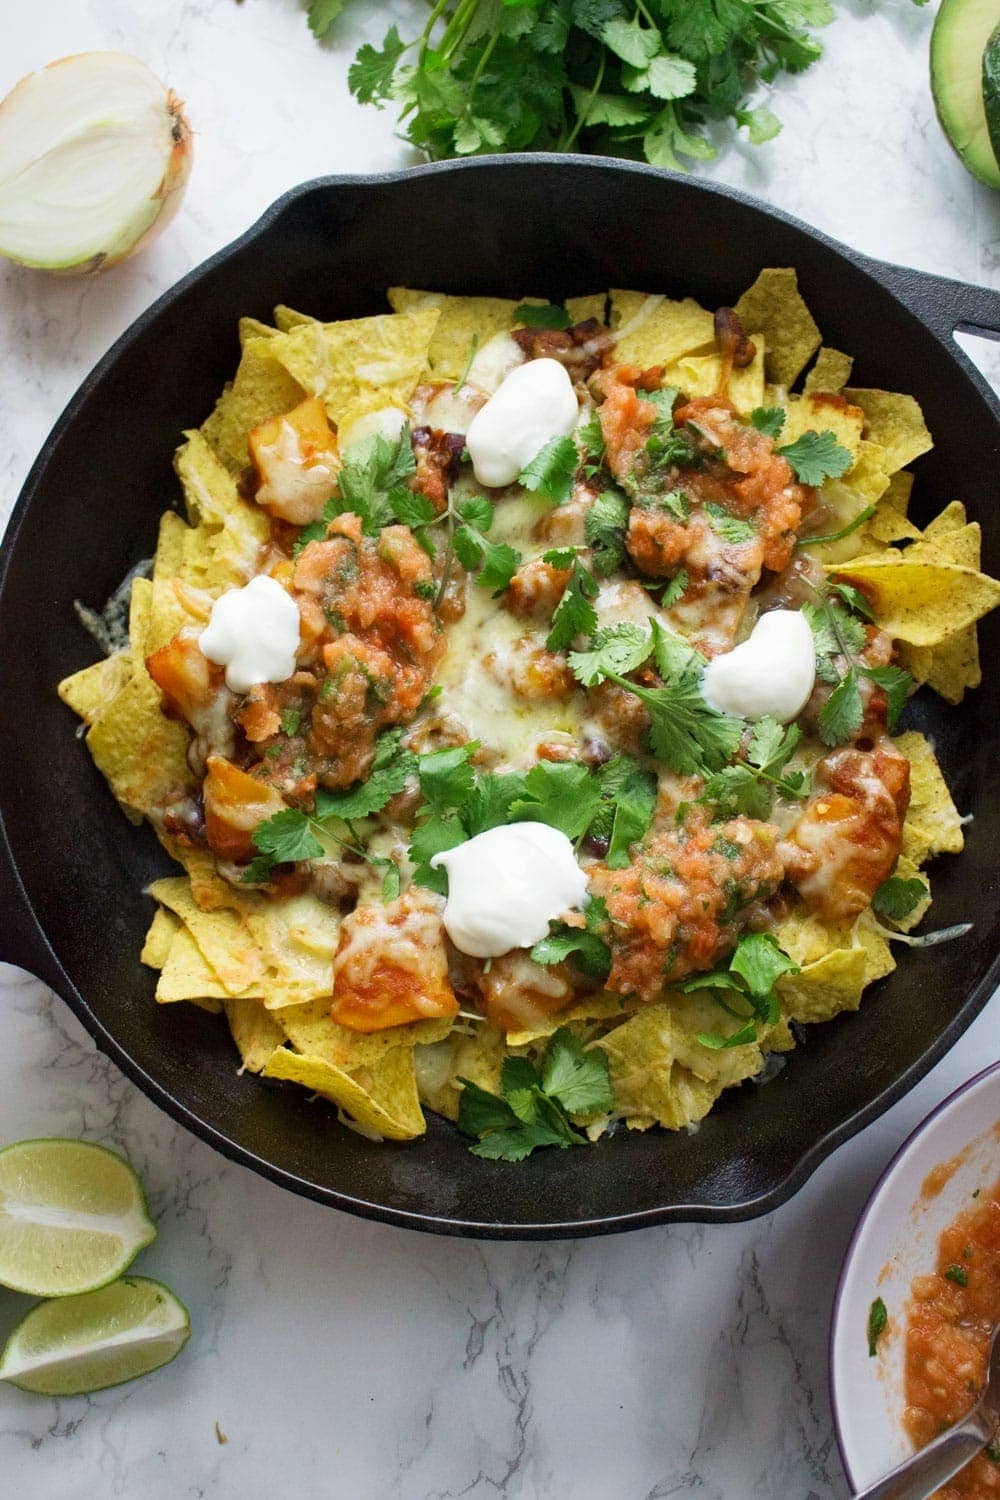 This healthy butternut squash chilli makes the perfect topping for these vegetarian nachos. Add your favourite toppings for a delicious twist on a classic!